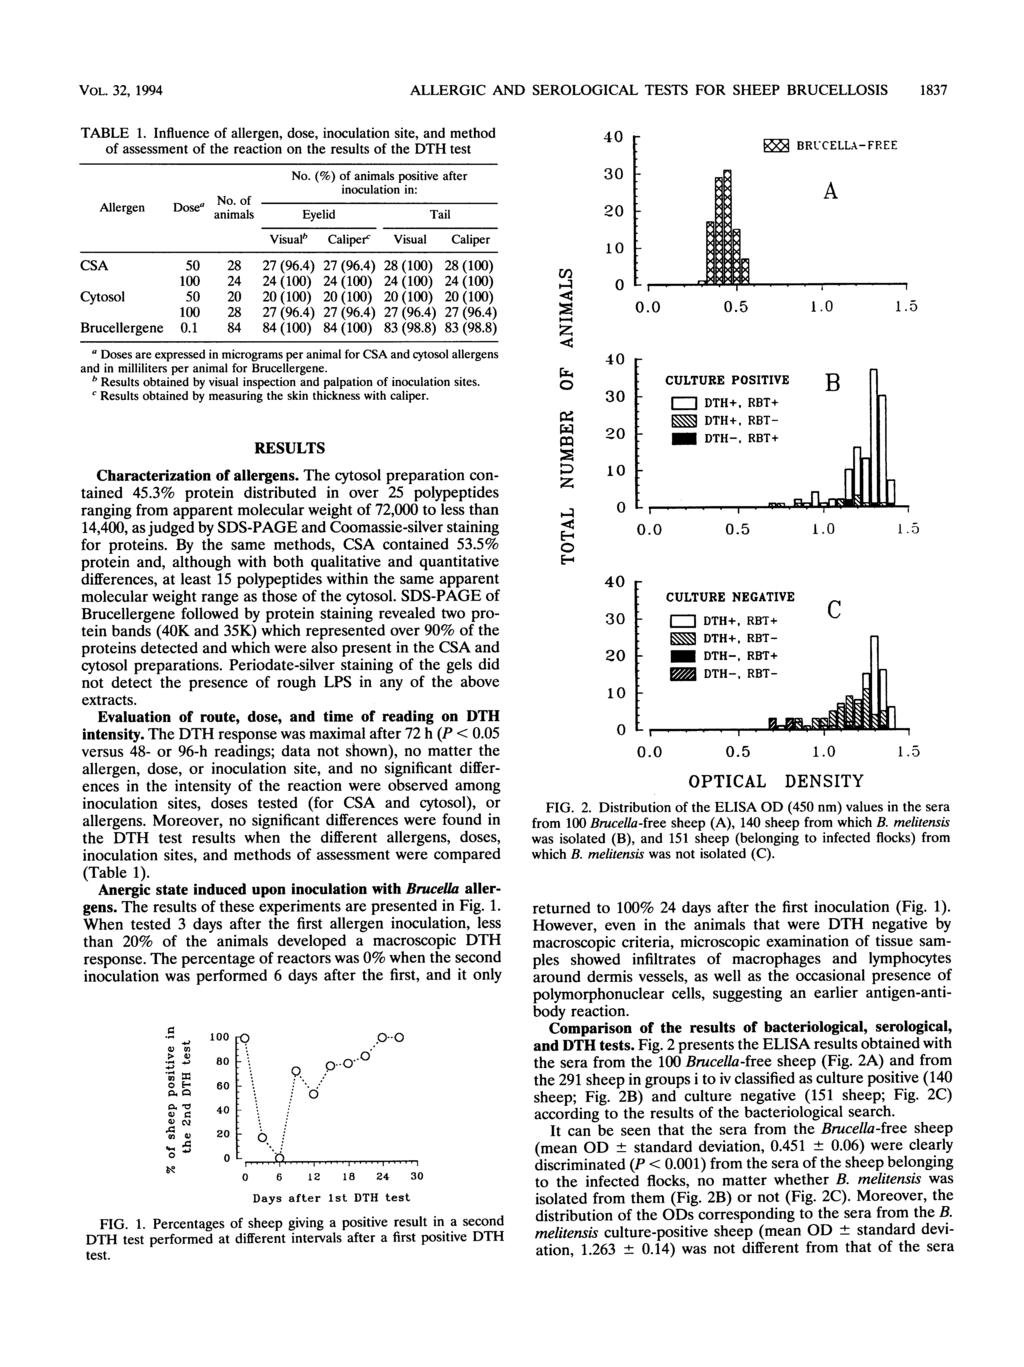 VOL. 32, 1994 TABLE 1. Influence of allergen, dose, inoculation site, and method of assessment of the reaction on the results of the DTH test No.